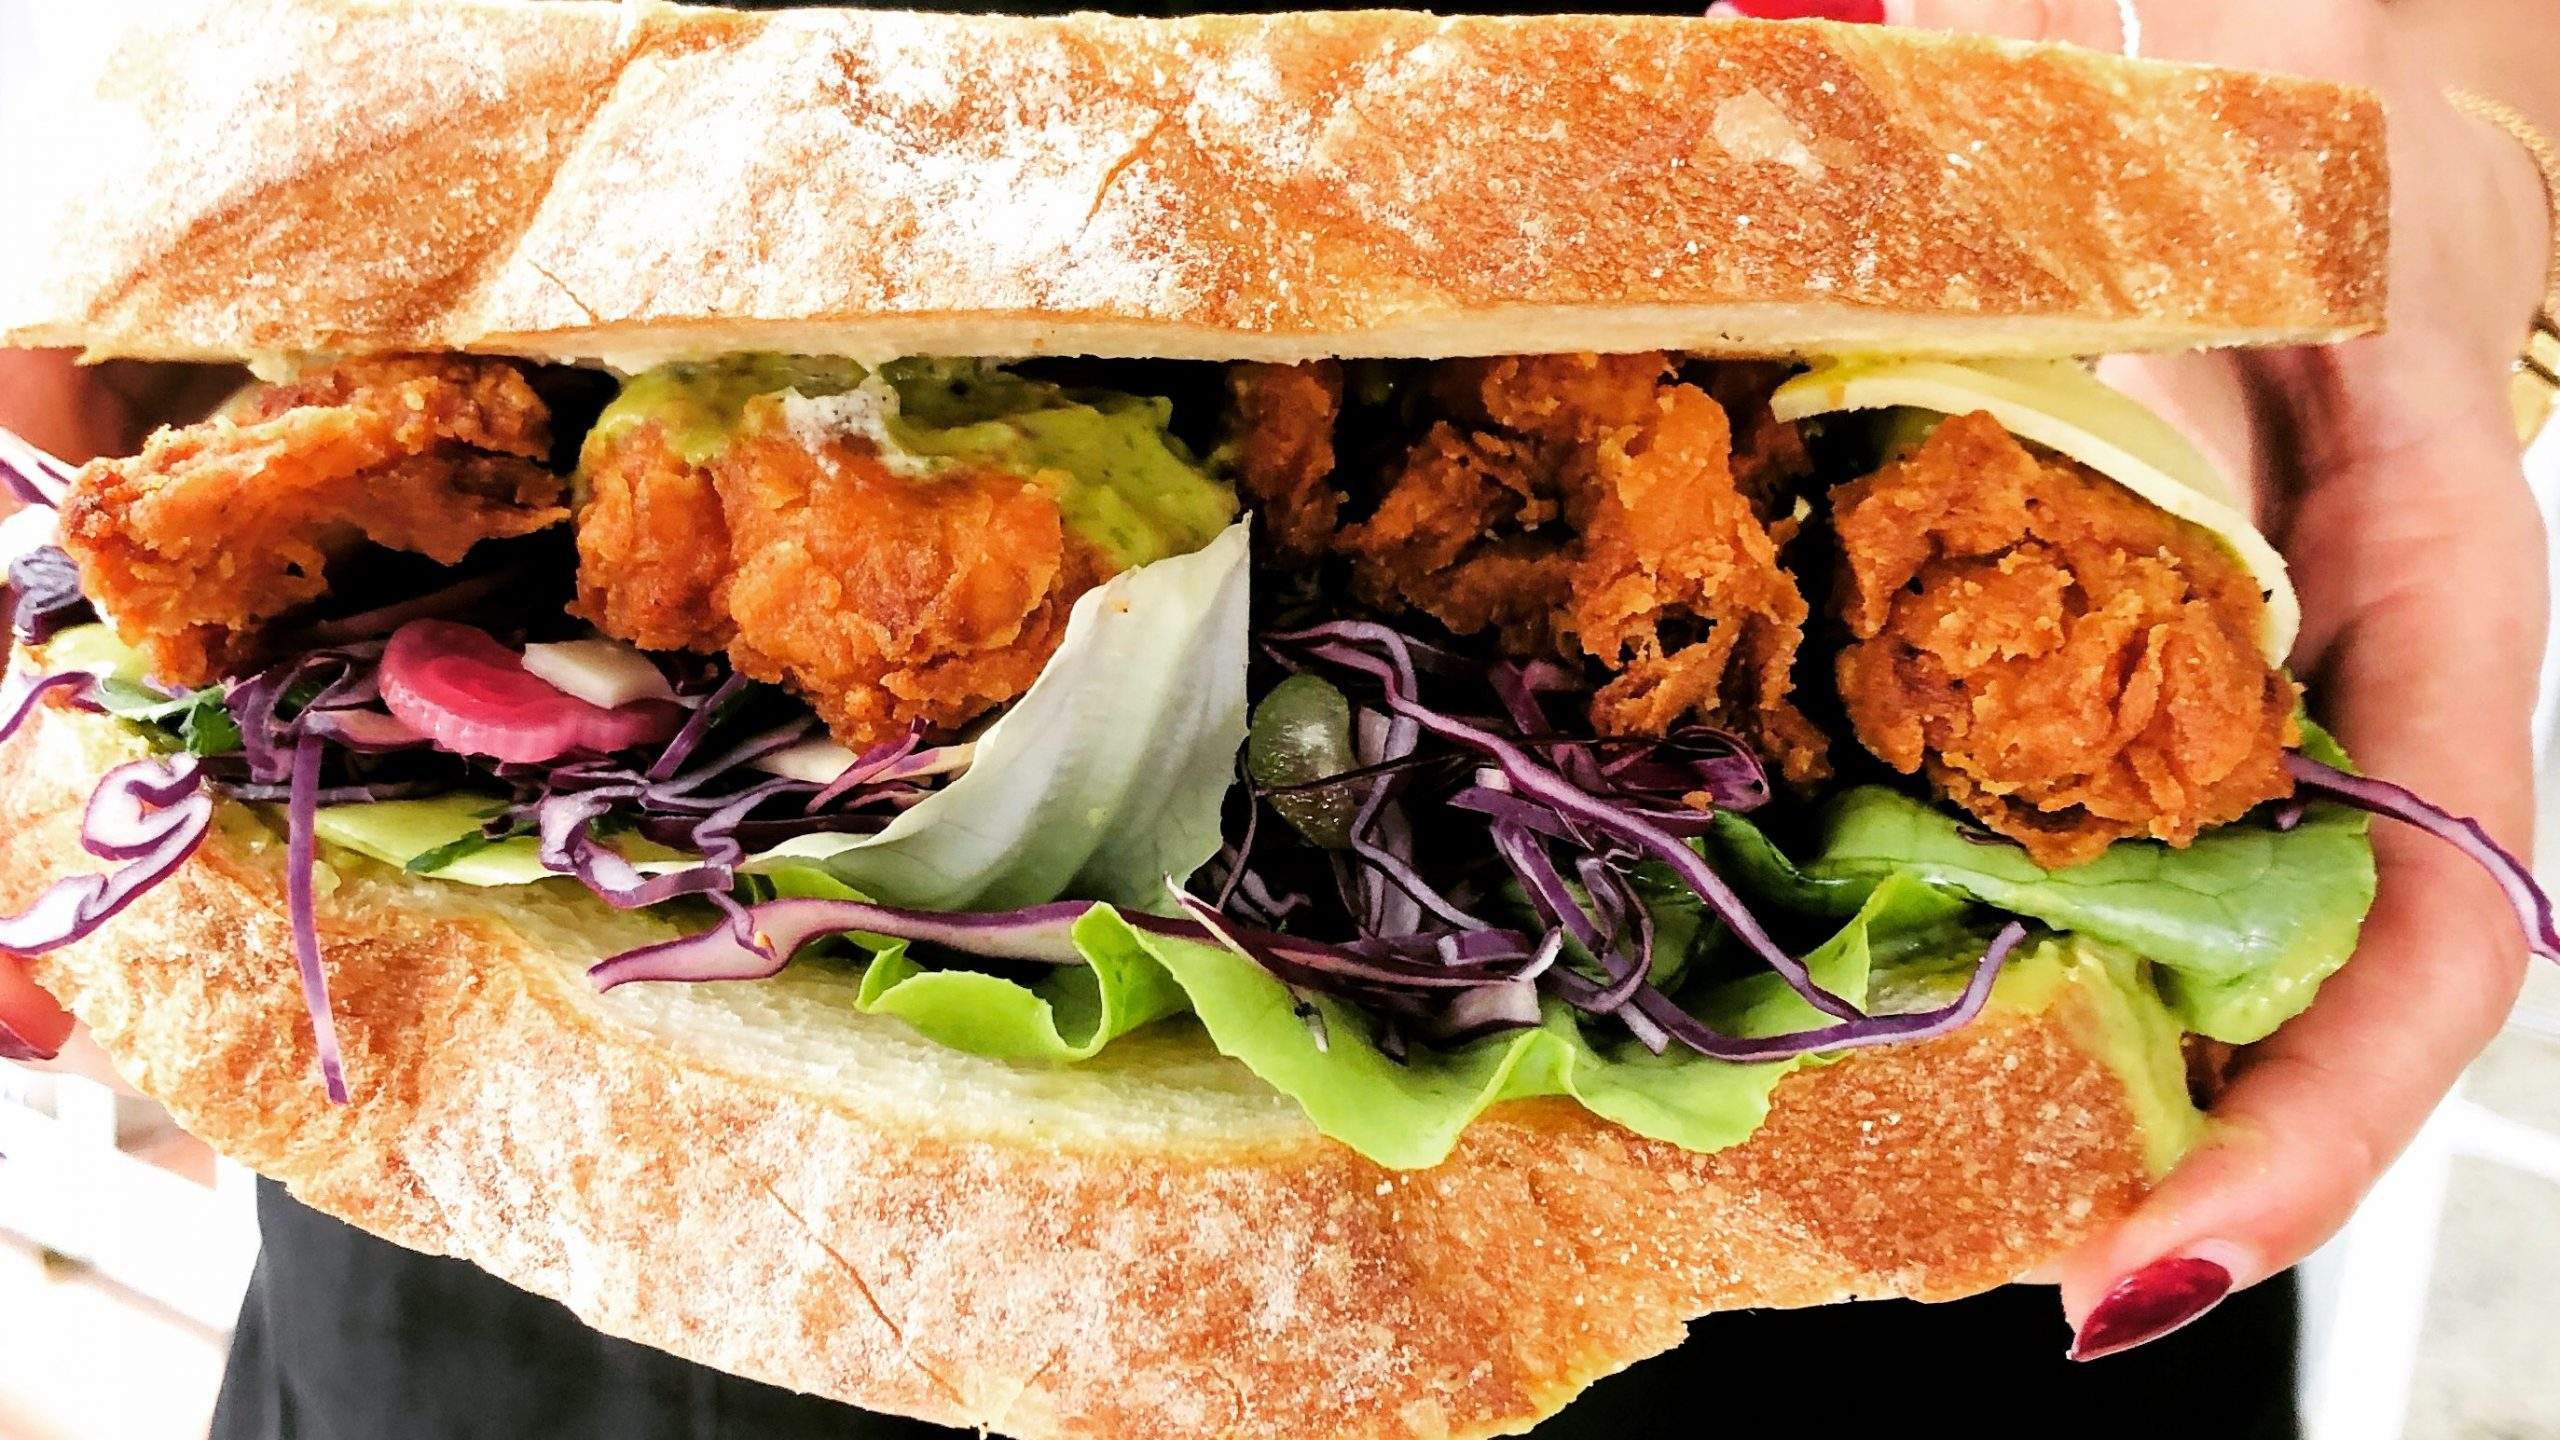 Darlinghurst's Mrs Palmer Is Selling Takeaway Sandwiches Created by Some of Sydney's Best Chefs